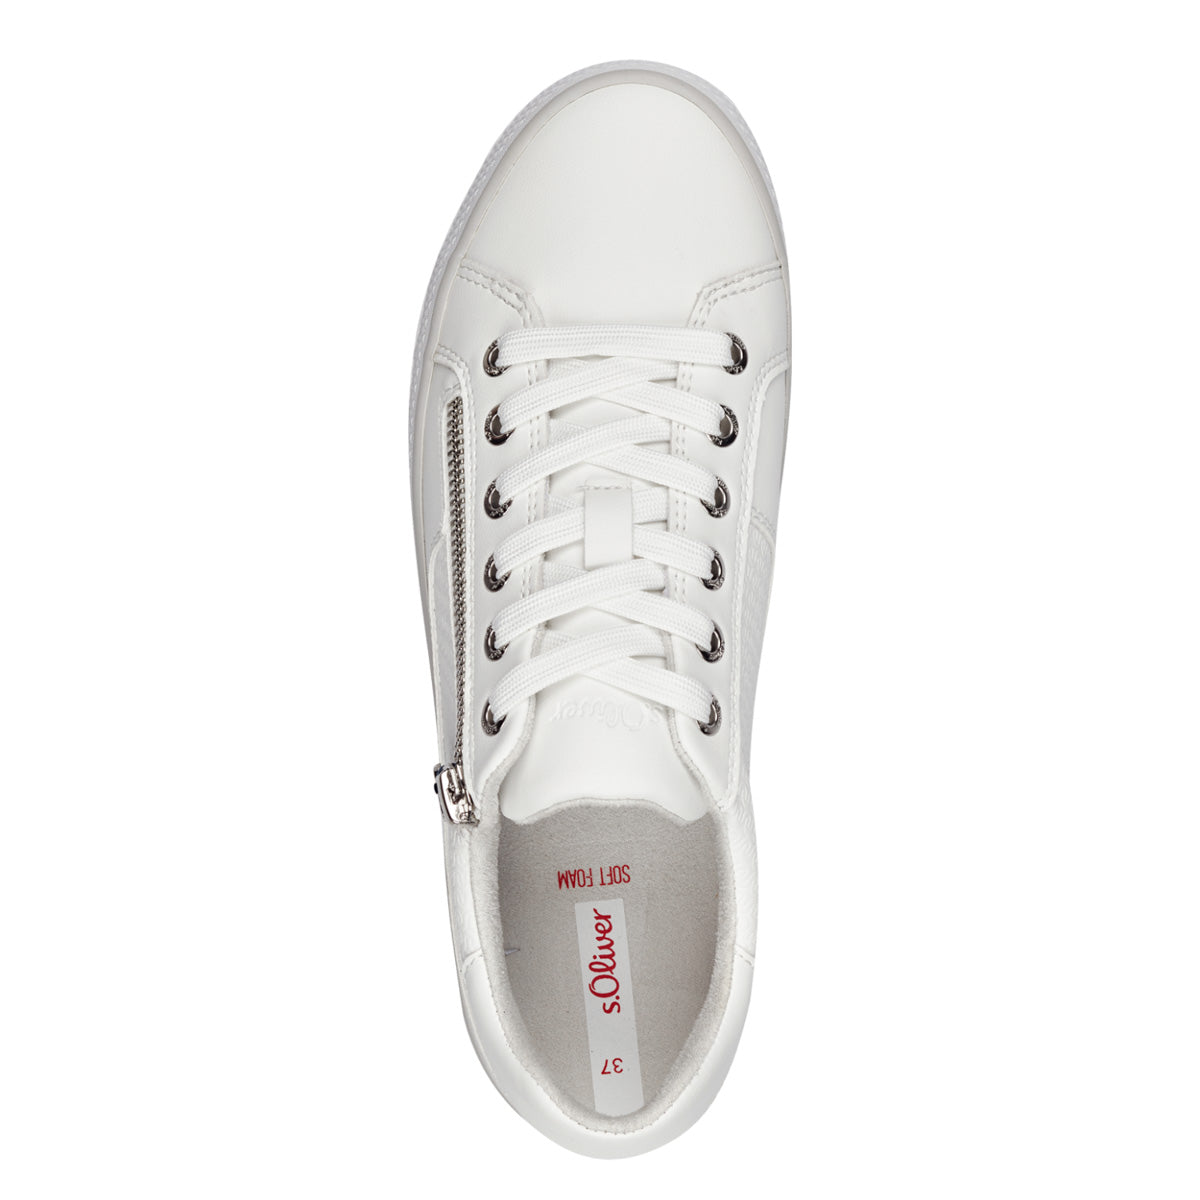 Top view of S.Oliver White Sneakers, focusing on the lace-up design and simple style.